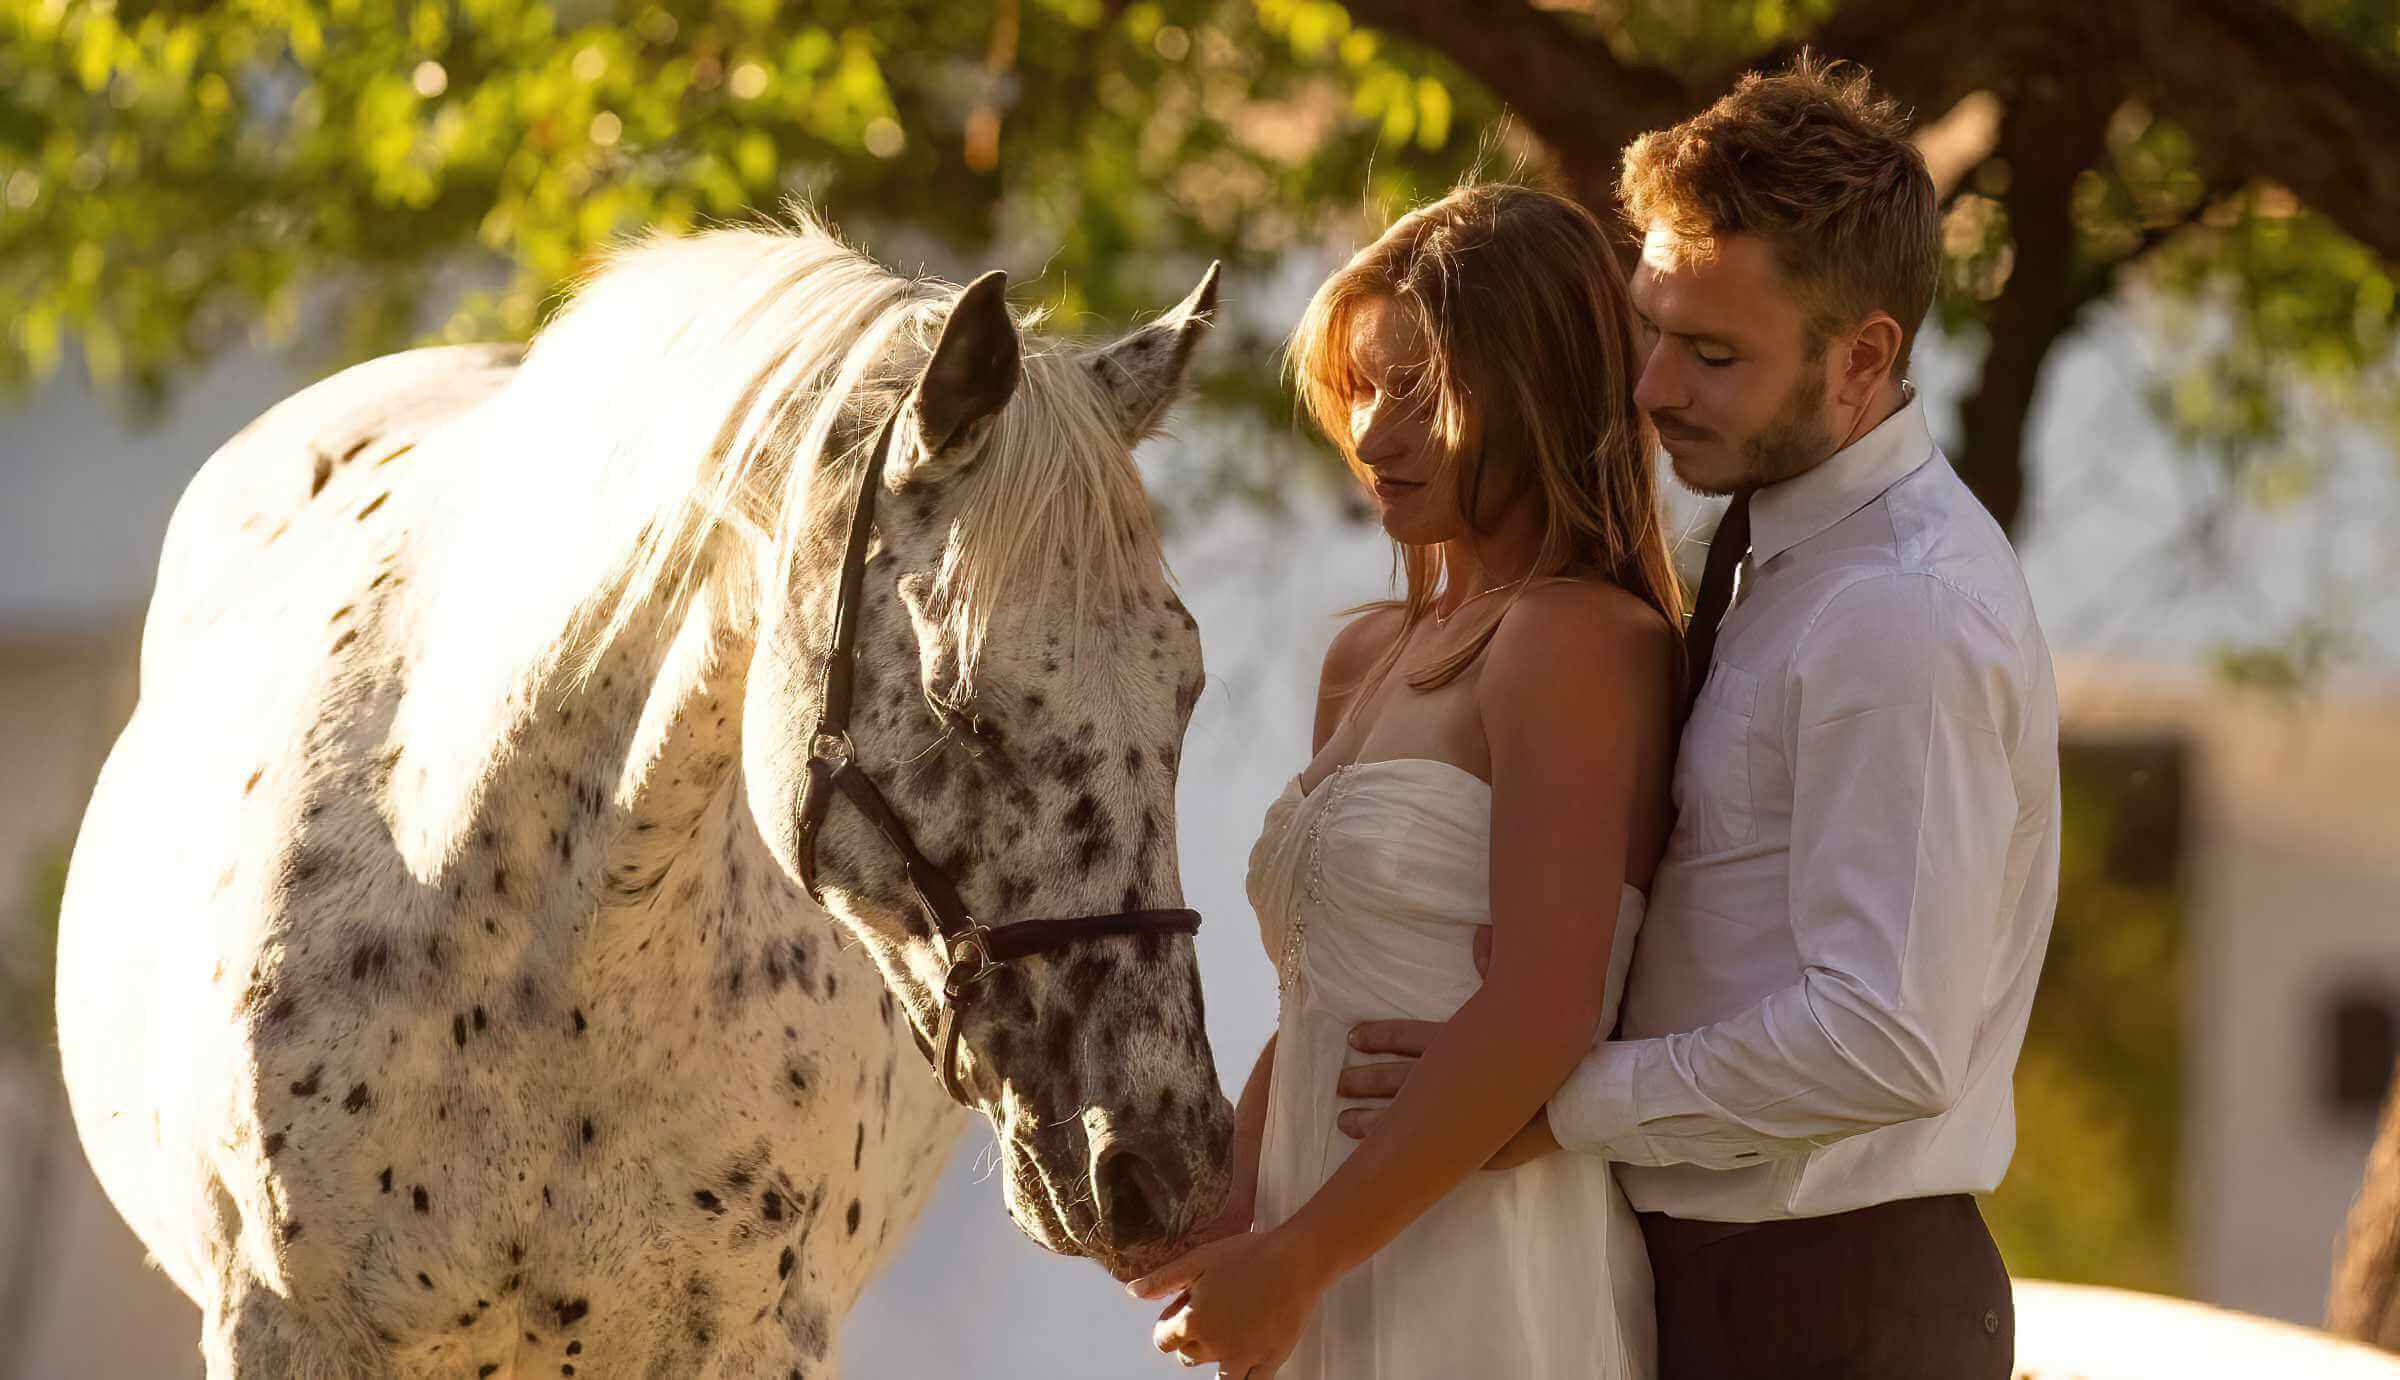 A young newlywed couple in a tender embrace, photographed with the horses of the Joseph's Dream Stud.